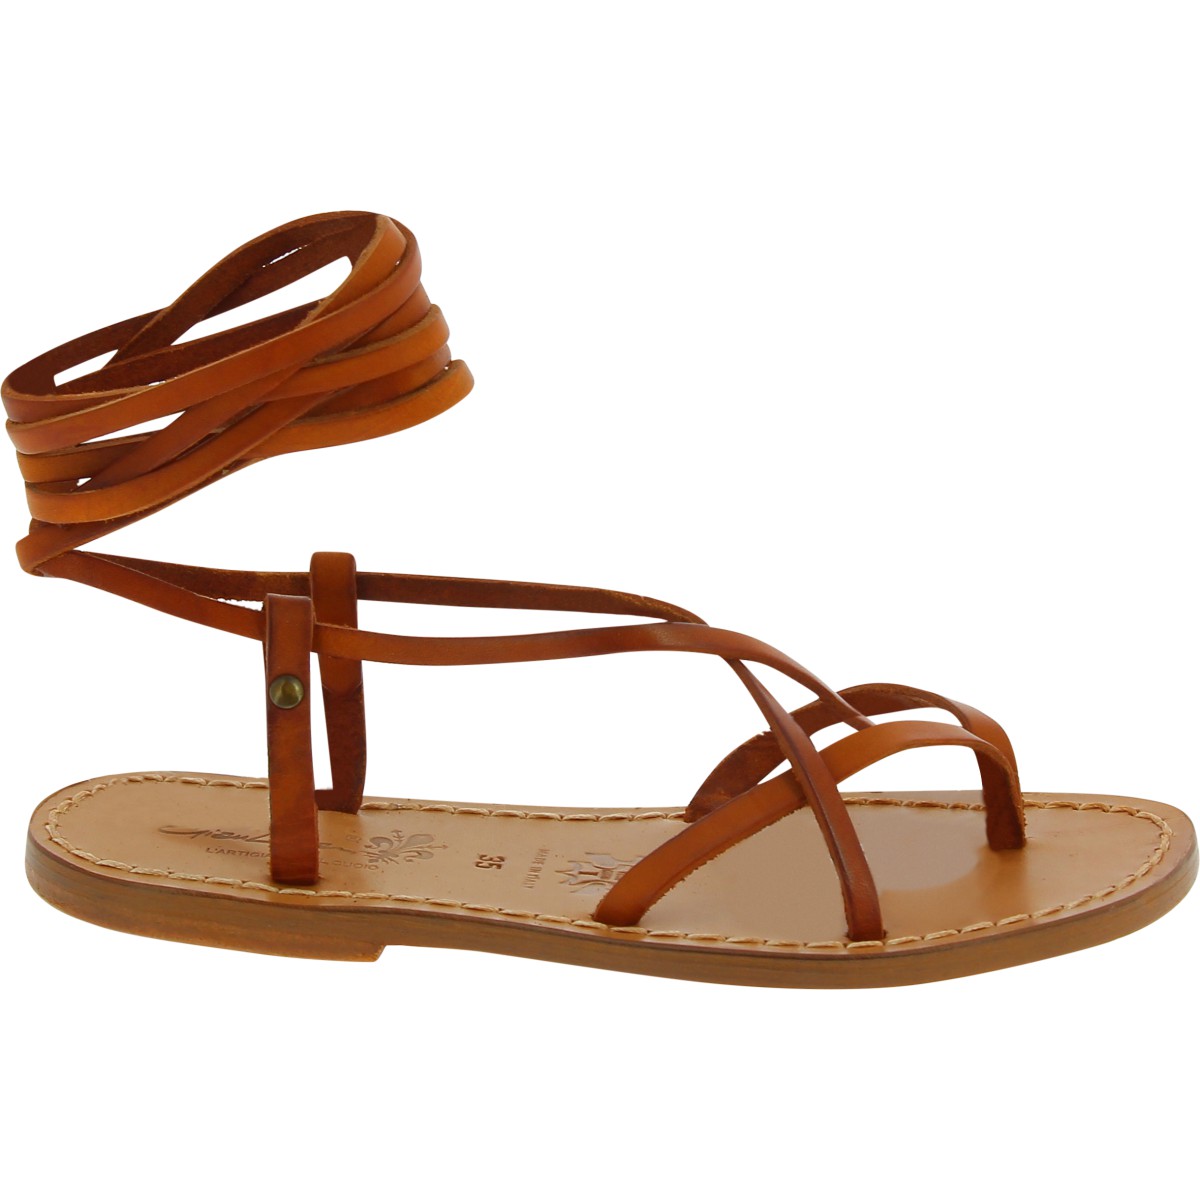 Women's brown leather flat strappy sandals handmade in Italy | The leather  craftsmen